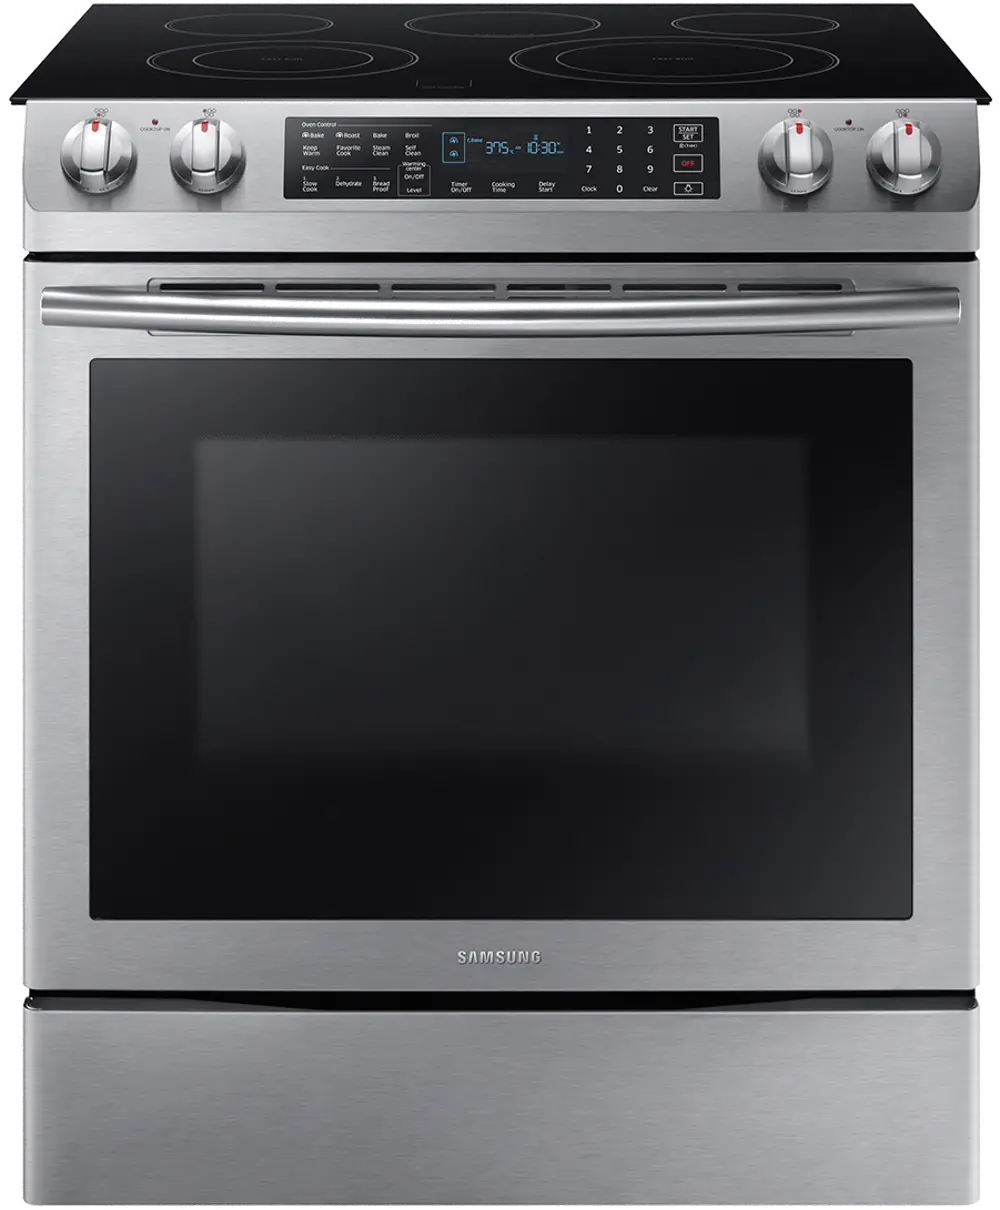 NE58K9430SS Samsung 30 Inch Slide In Electric Convection Range - 5.8 cu. ft. Stainless Steel-1